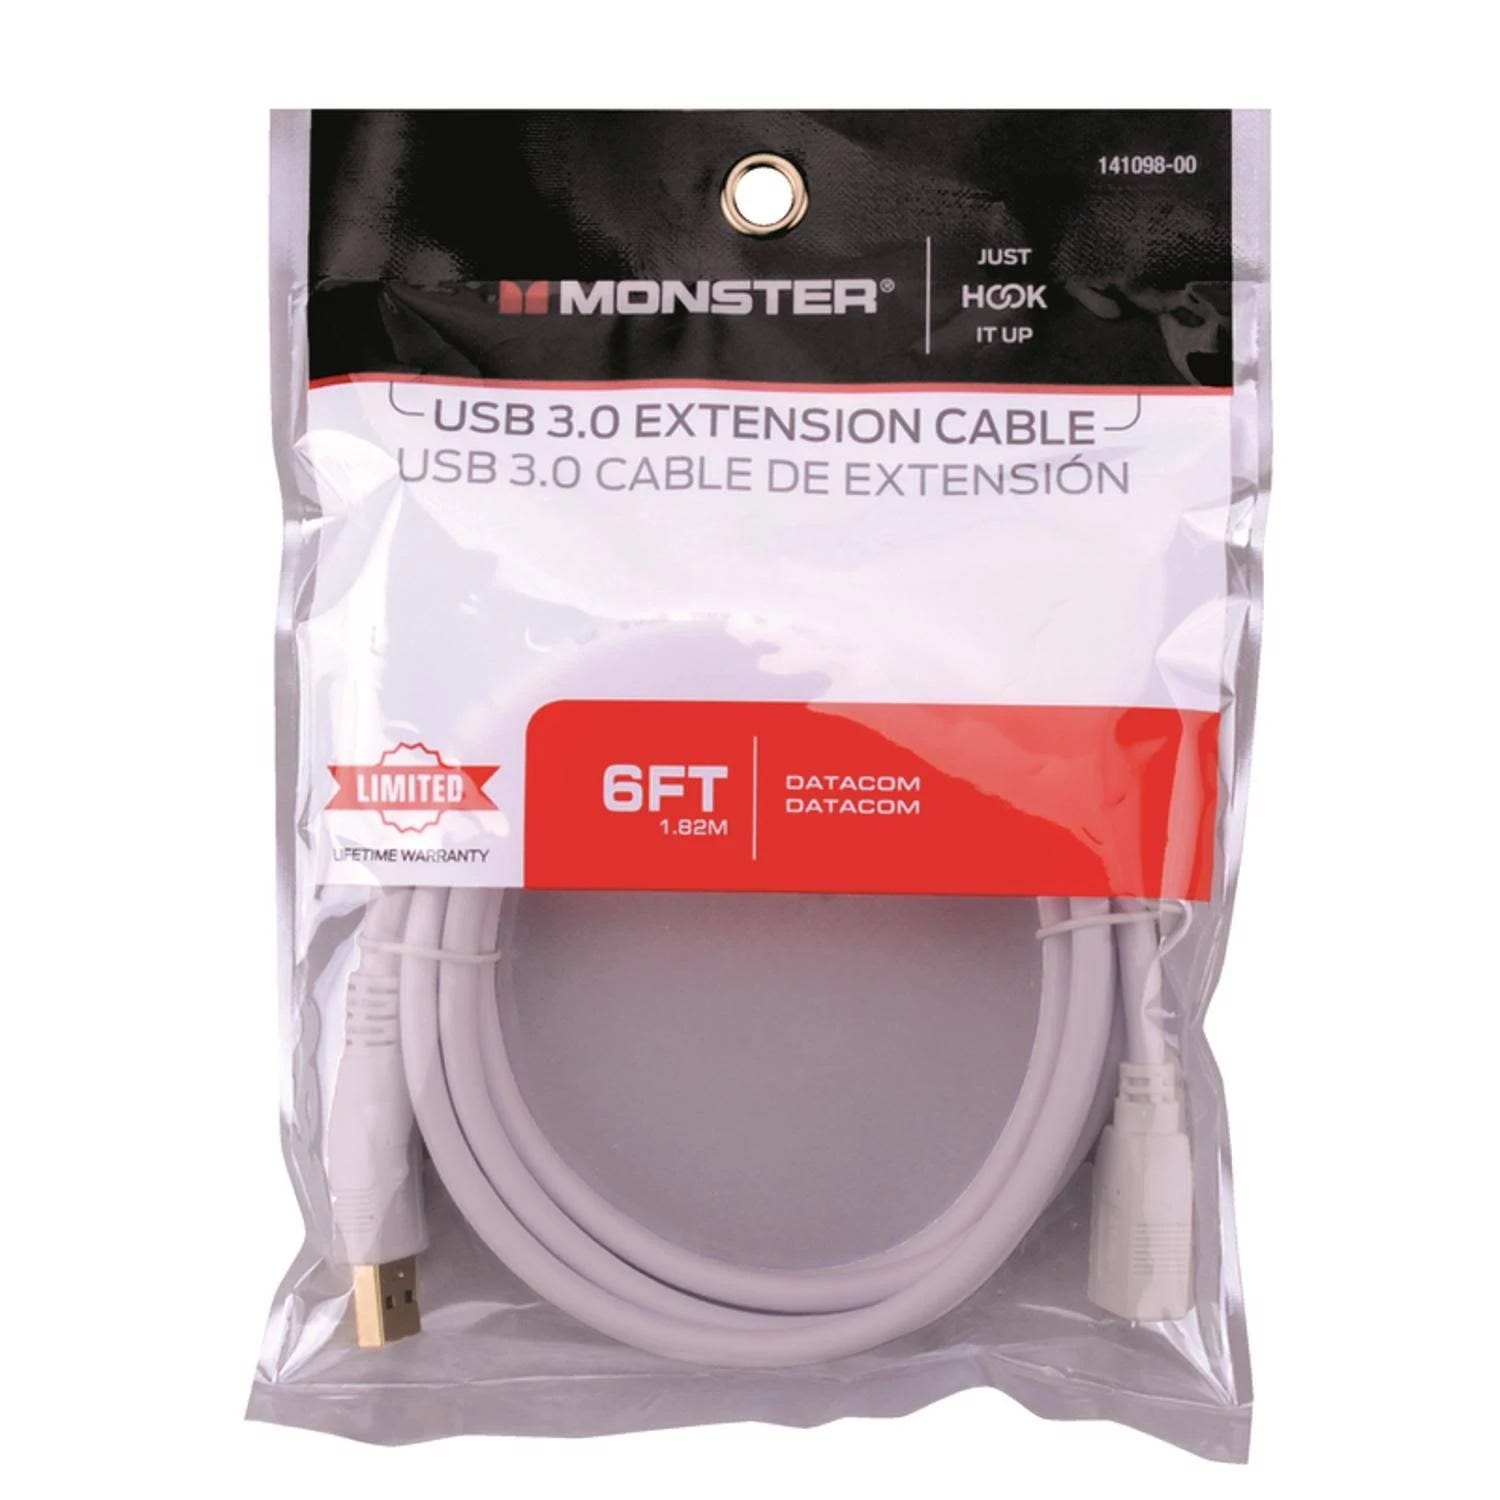 6 Foot USB Extension Cable | Image